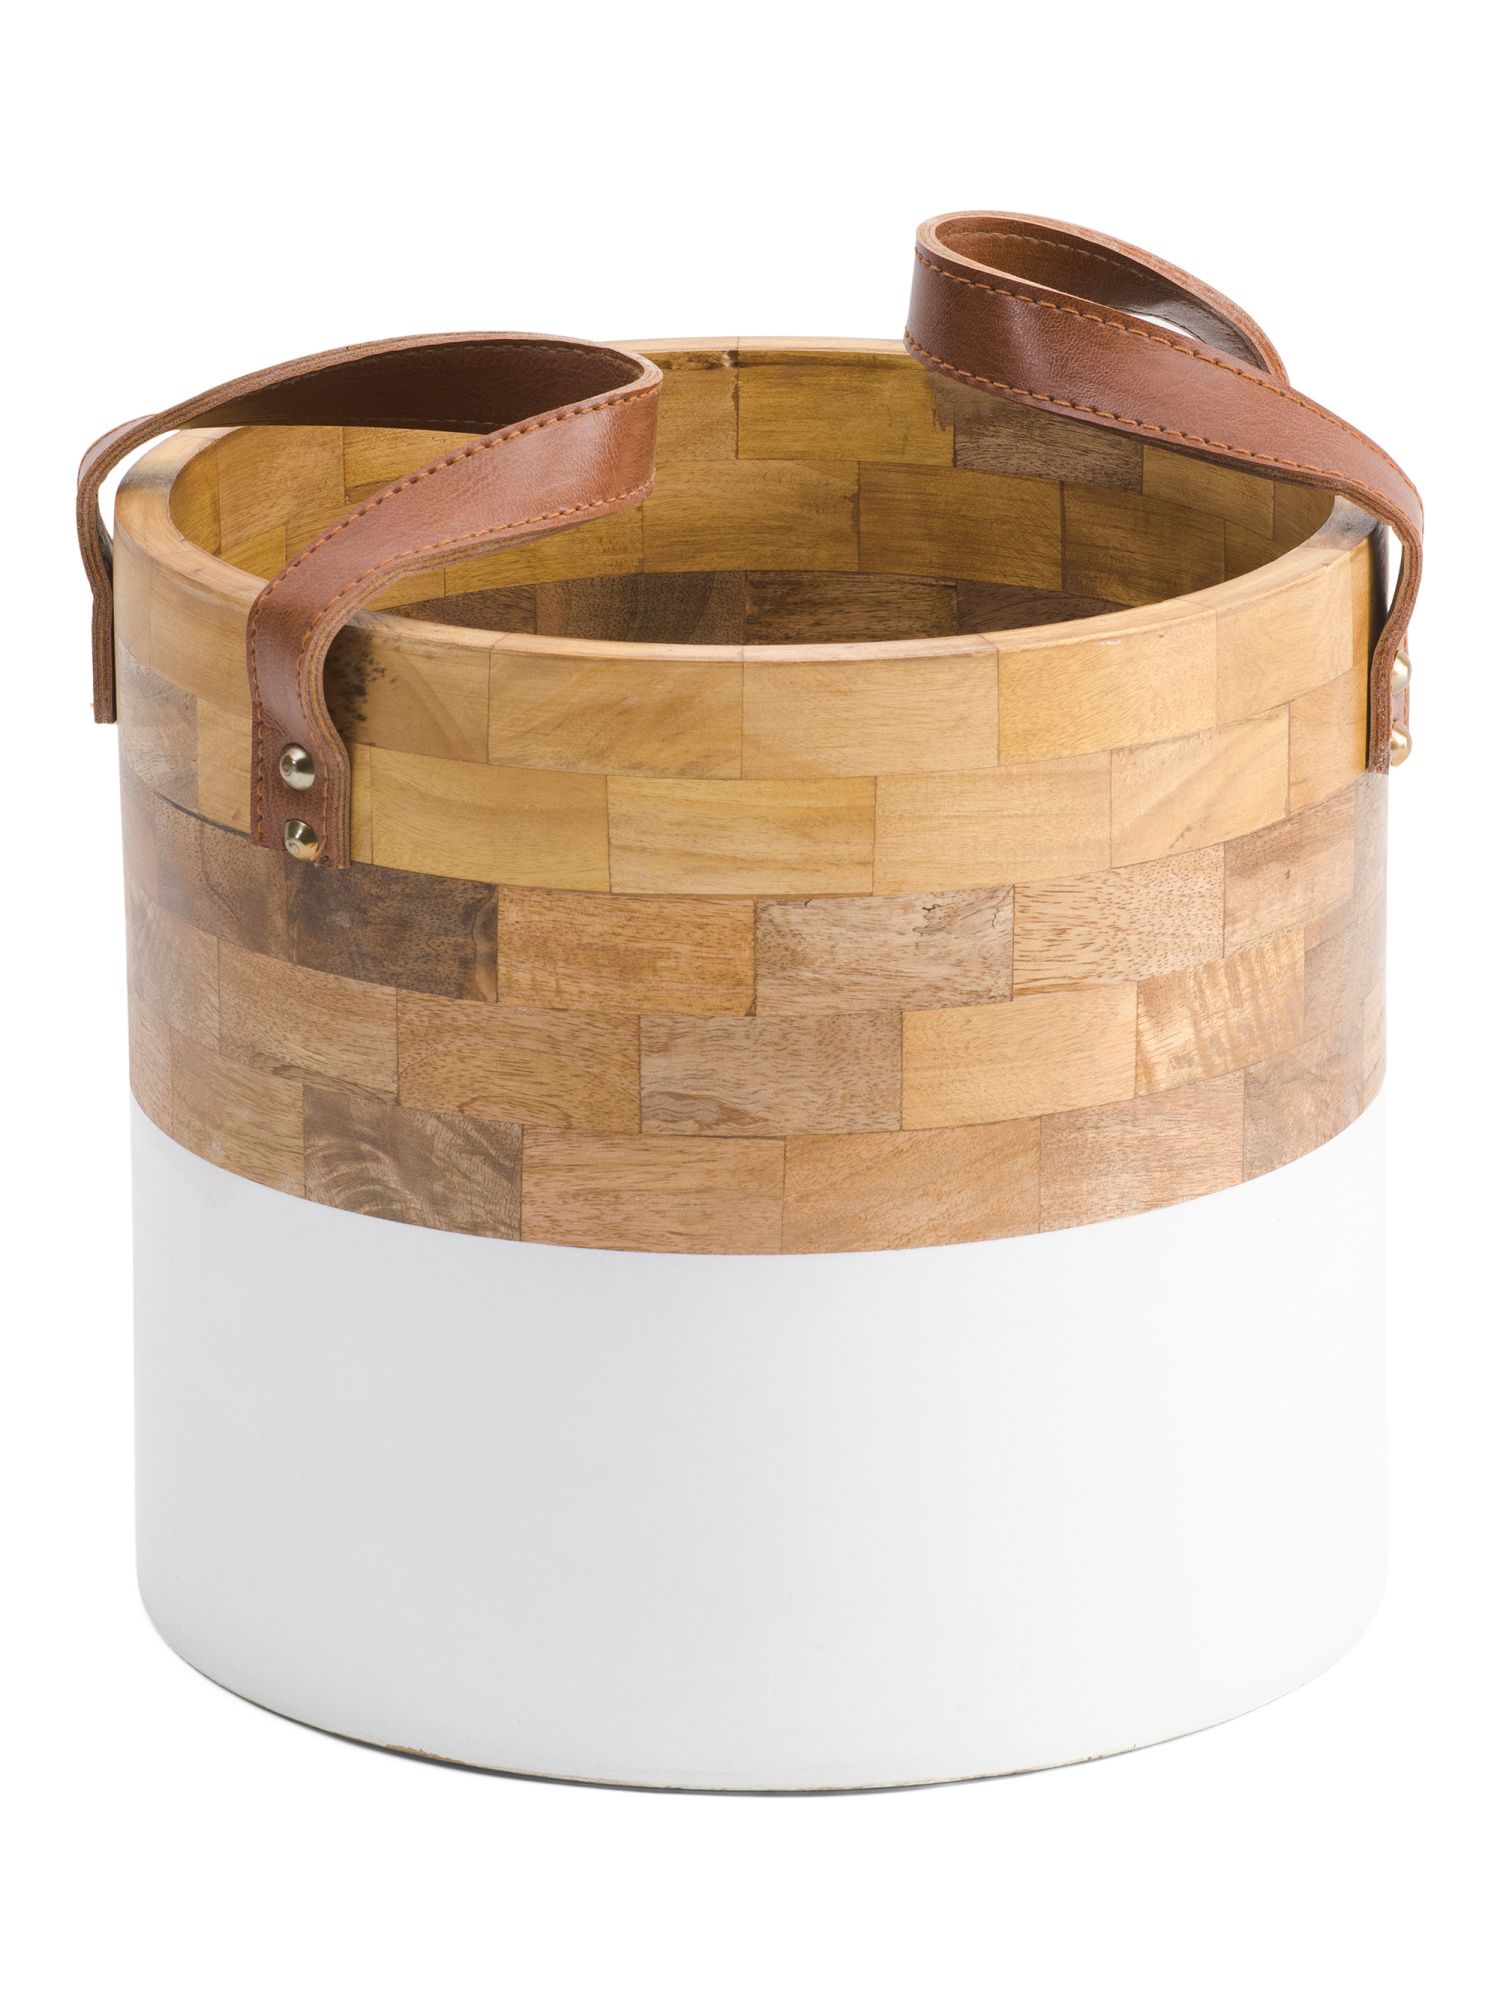 Dipped Wooden Planter Basket With Handles | TJ Maxx